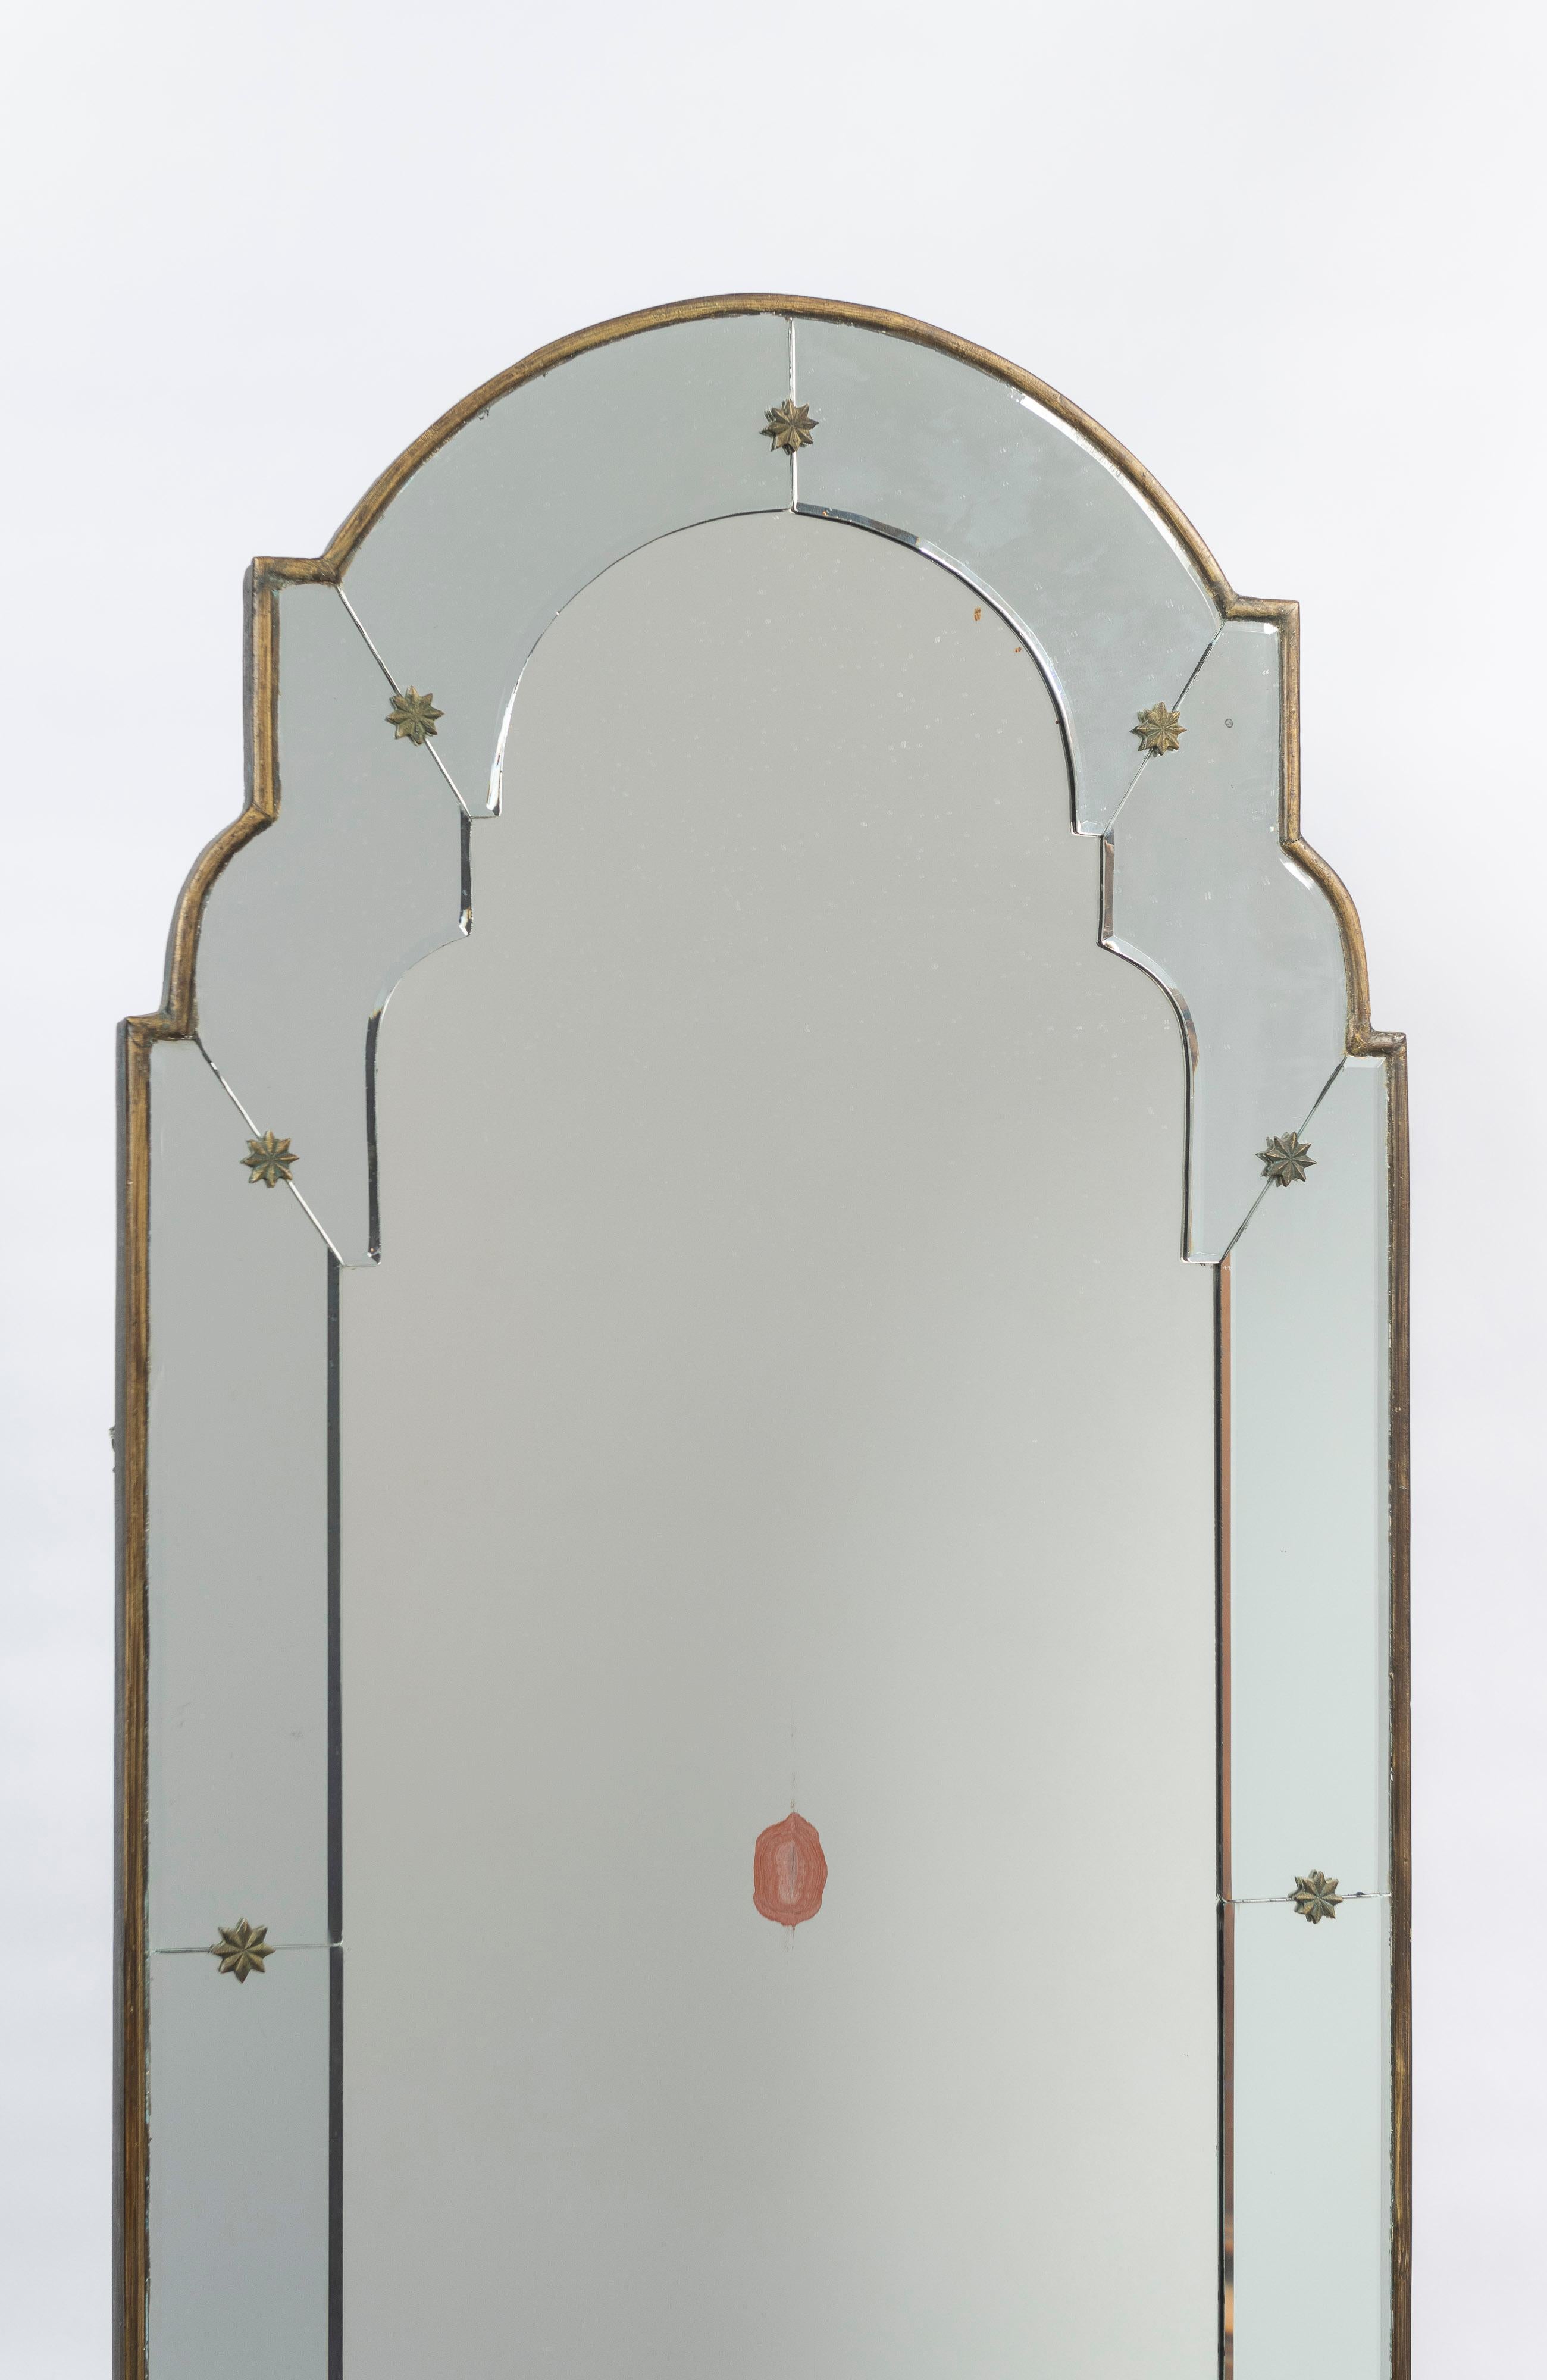 Venetian-Style Wall Mirror is arched with beveled mirror frame, ornate lacquered bronze floral shapes and gilt wood edge. The mirror has several cracks that are visible in the photos as well as couple distressed areas to the mirroring. Good piece